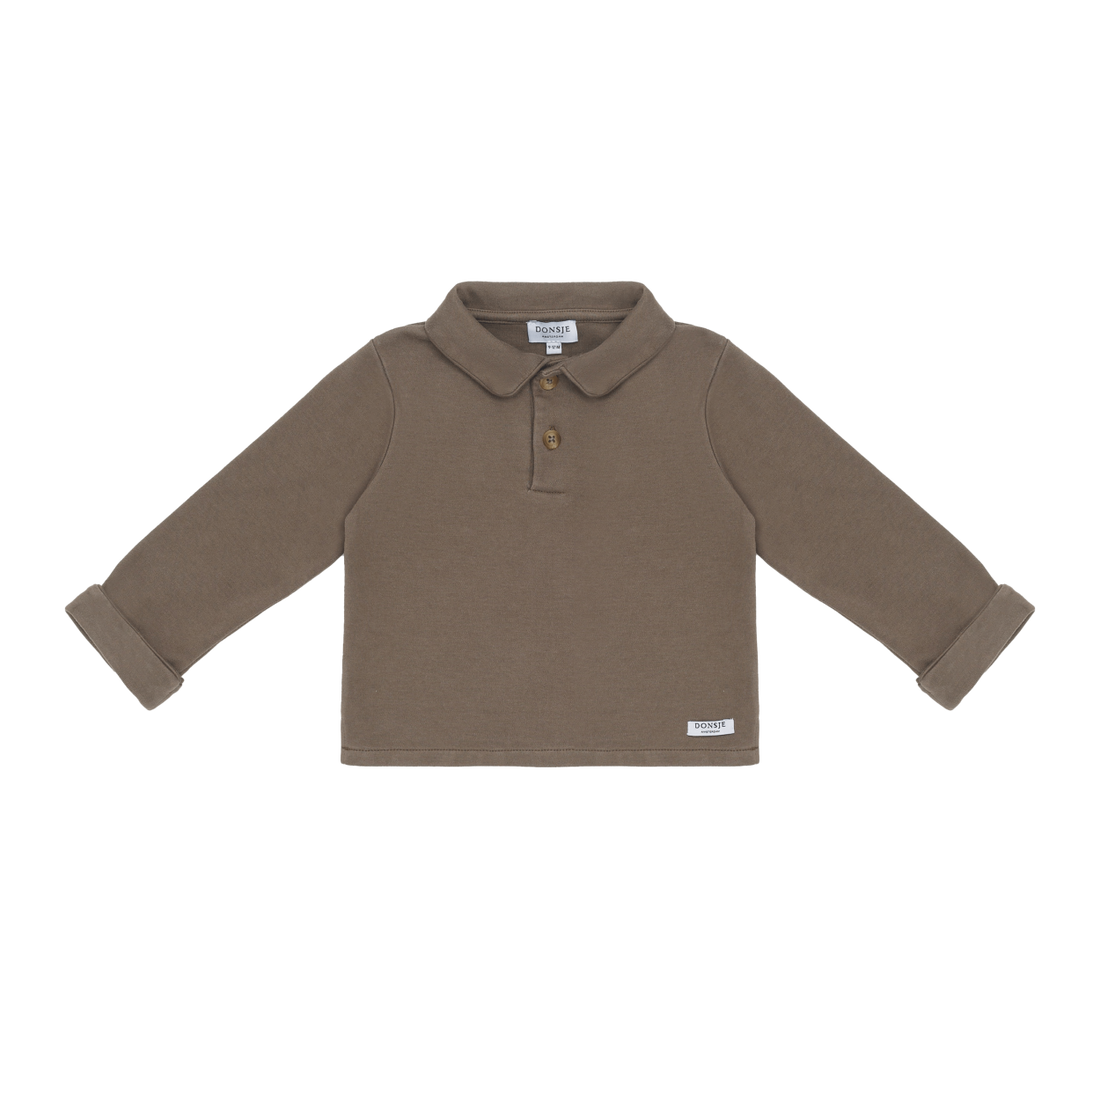 Tos Shirt | Dusty Brown